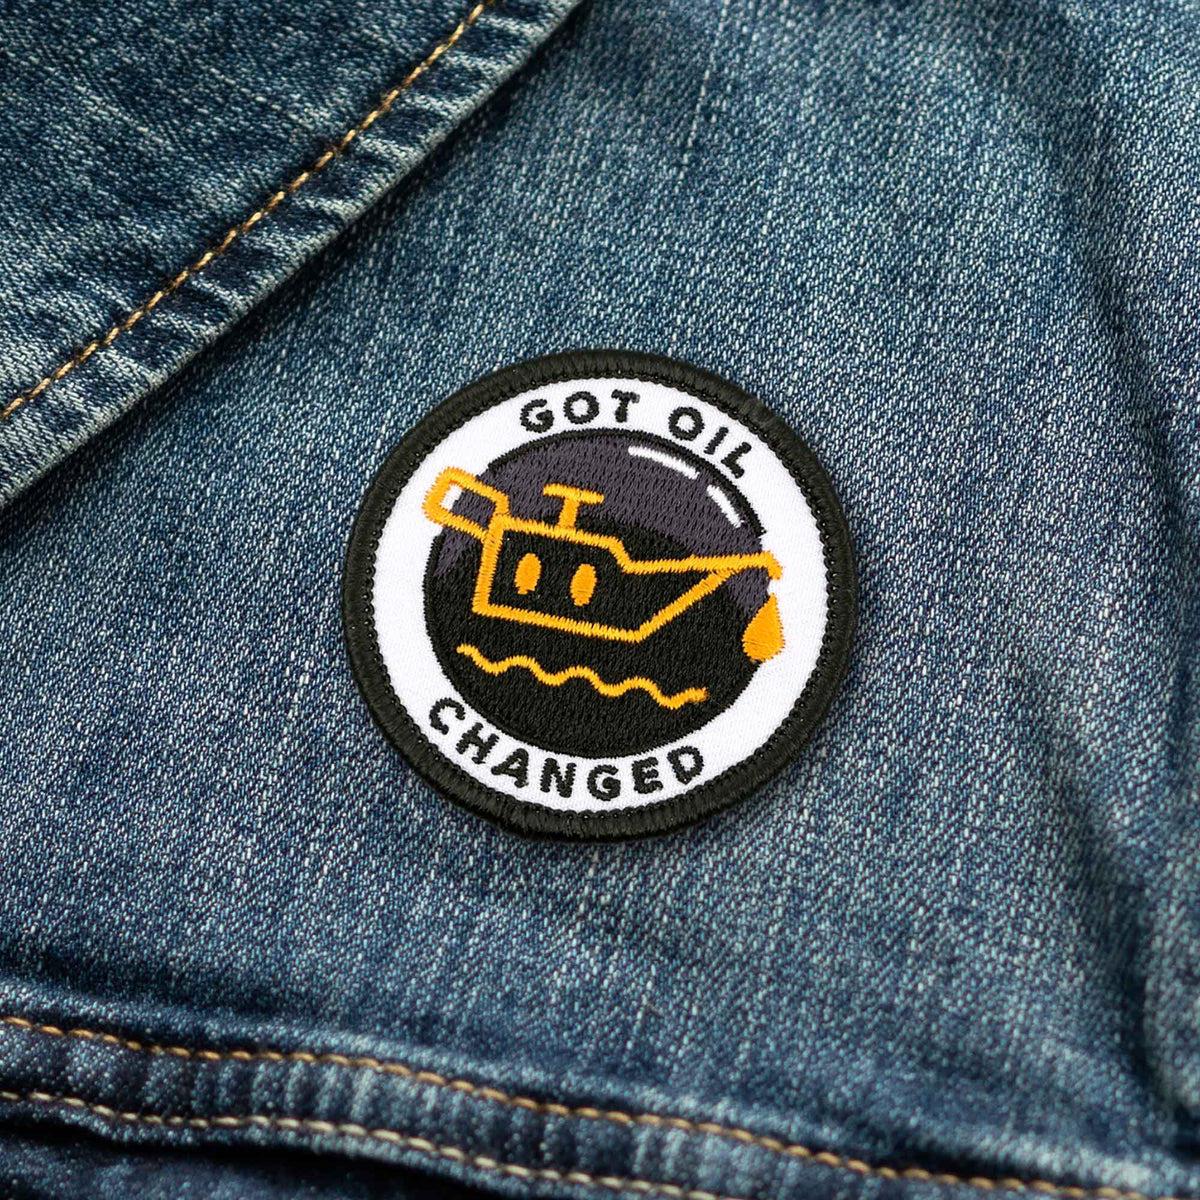 Got Oil Changed adulting merit badge patch for adults on denim jacket